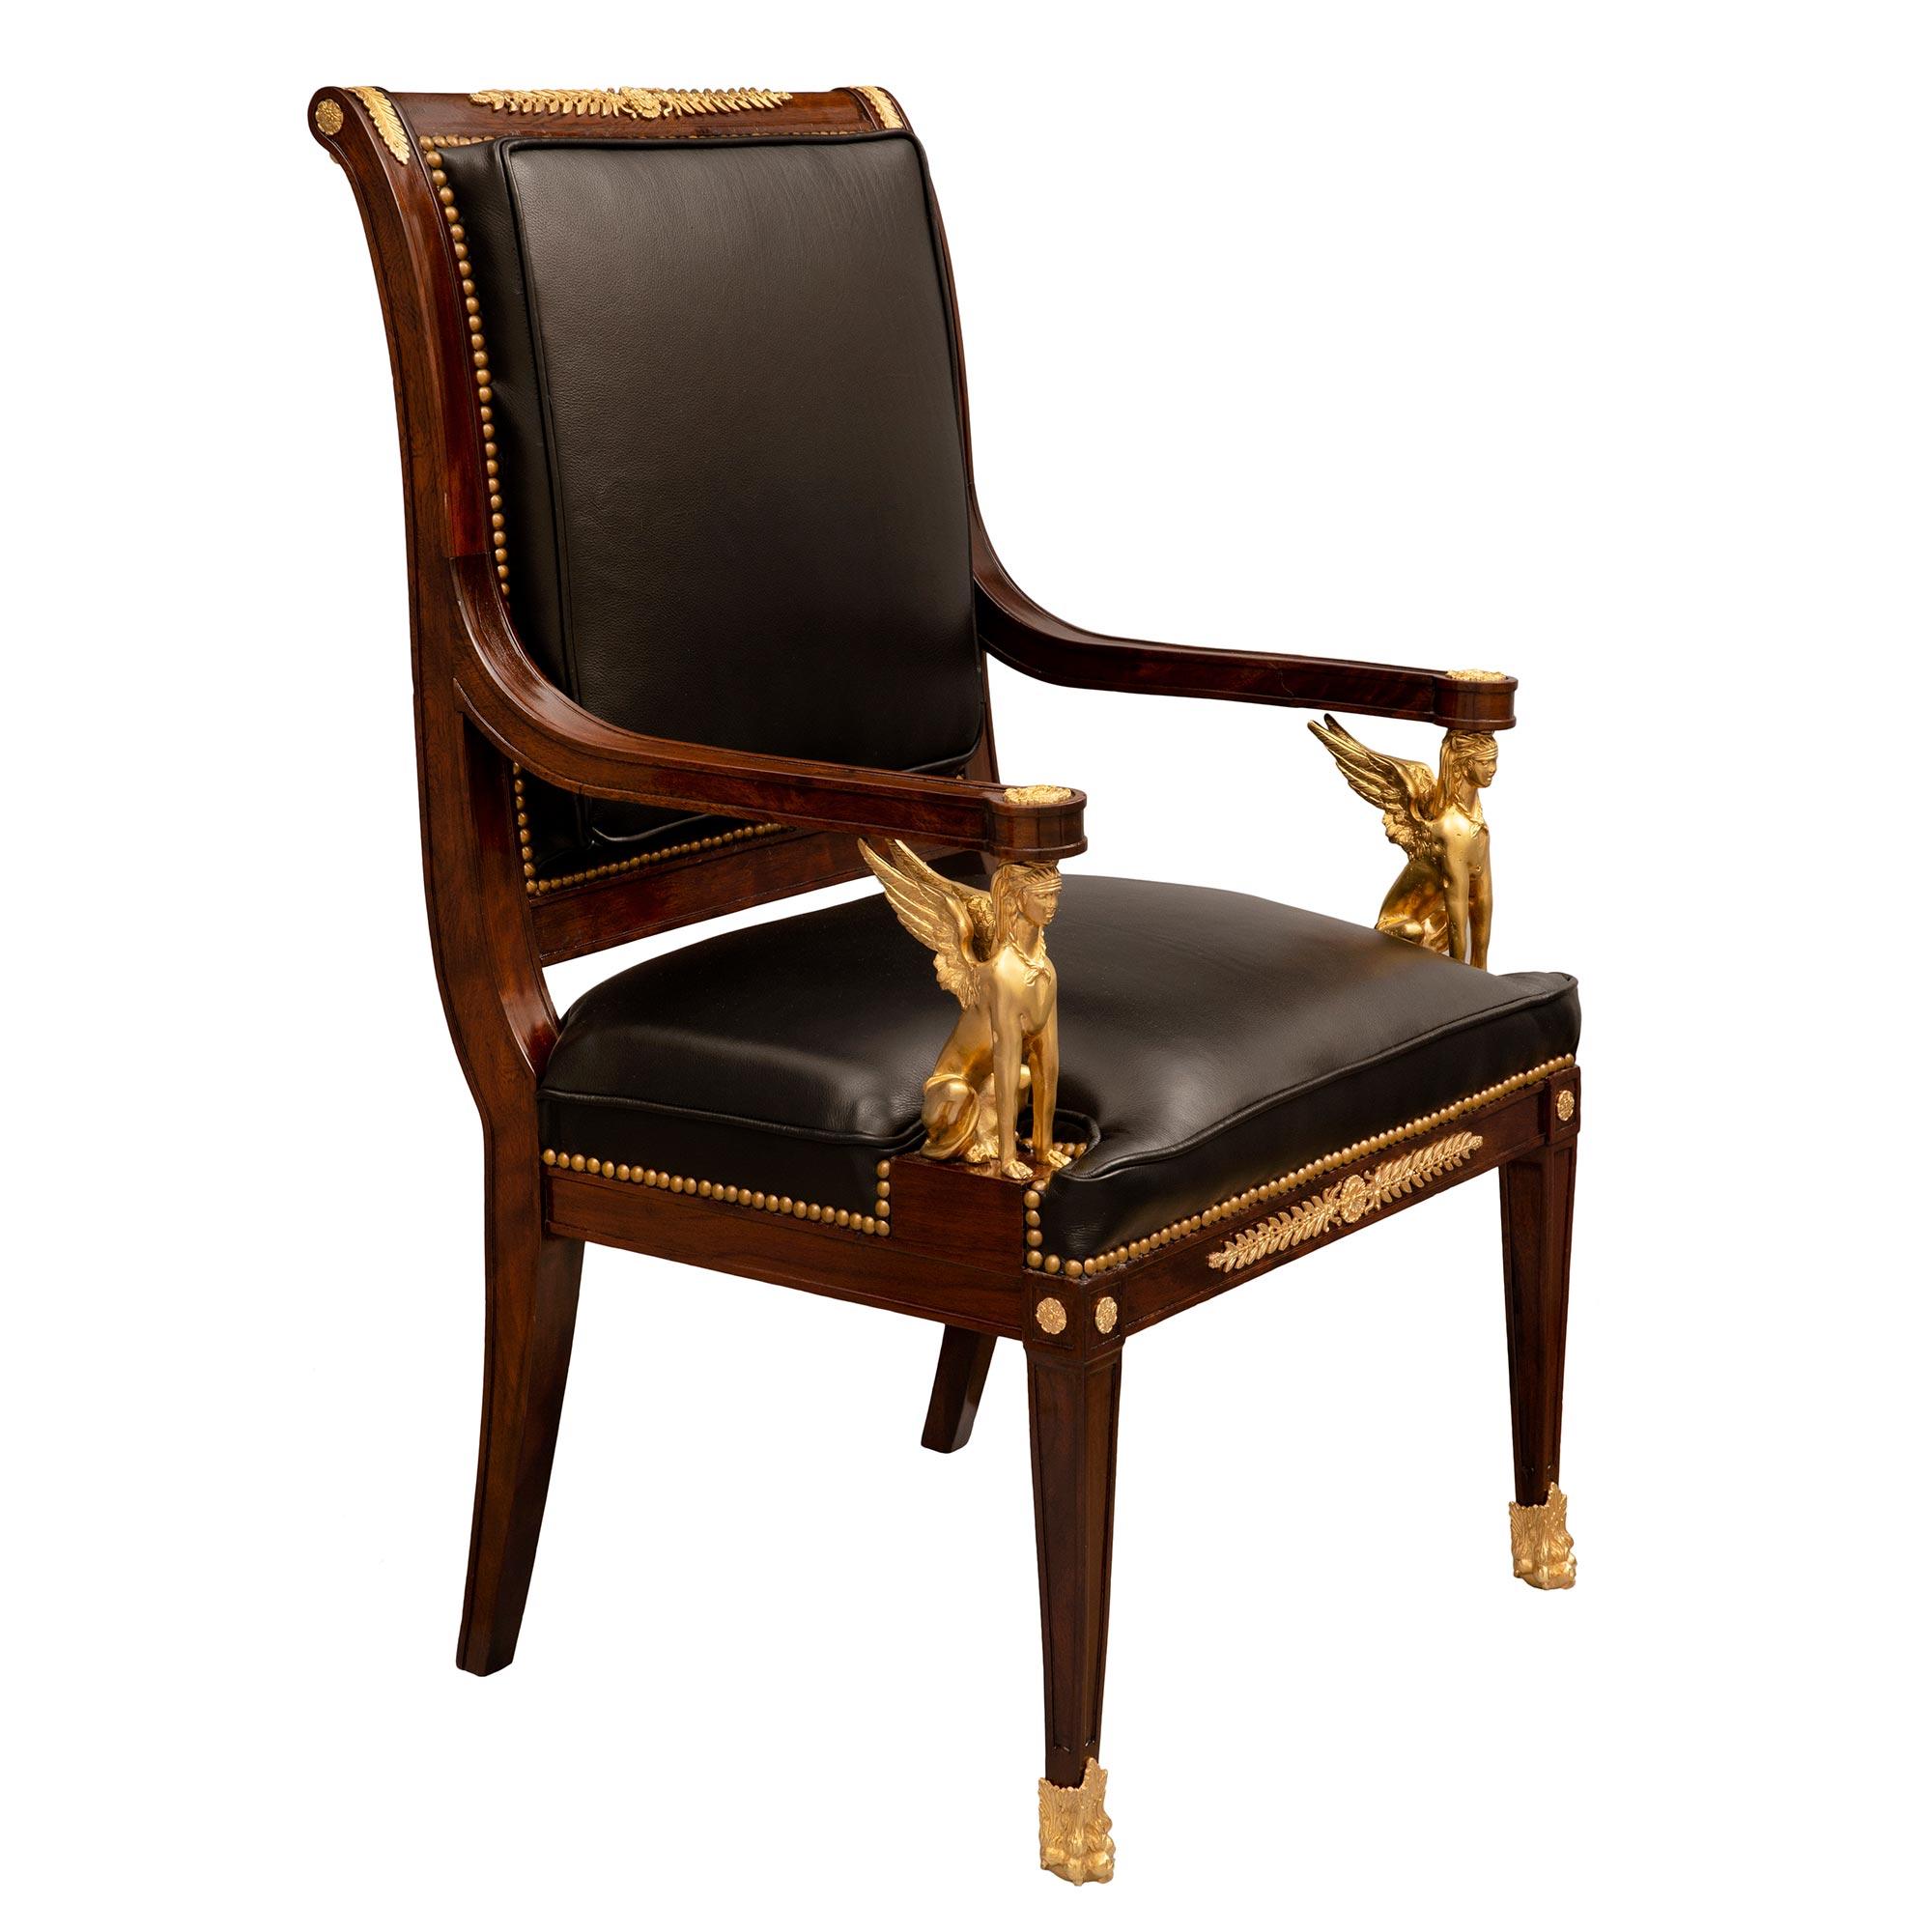 A handsome and most impressive pair of French 19th century Empire st. Belle Époque period mahogany and ormolu armchairs. Each armchair is raised by square tapered legs with richly chased paw feet and finely carved recessed panels at the front, and